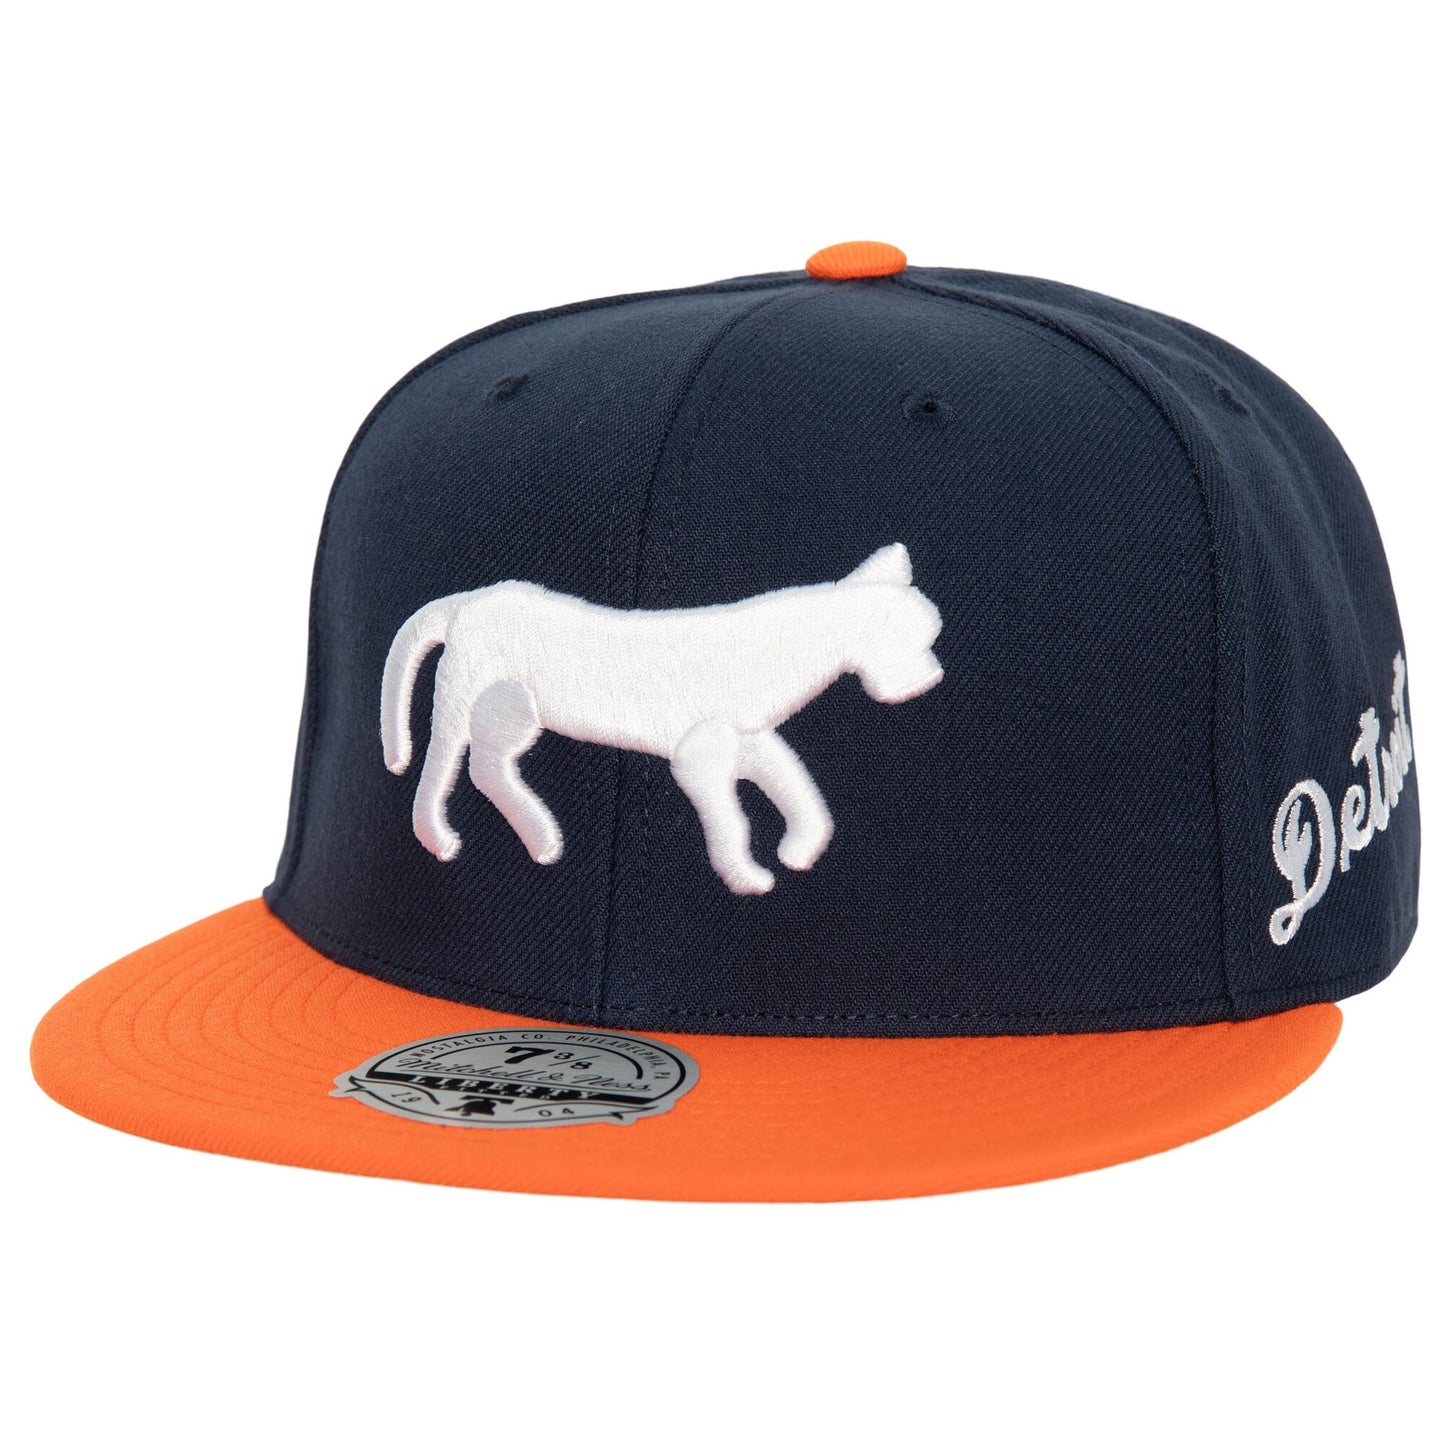 Detroit Tigers Mitchell & Ness Bases Loaded Fitted Hat - Navy/Orange